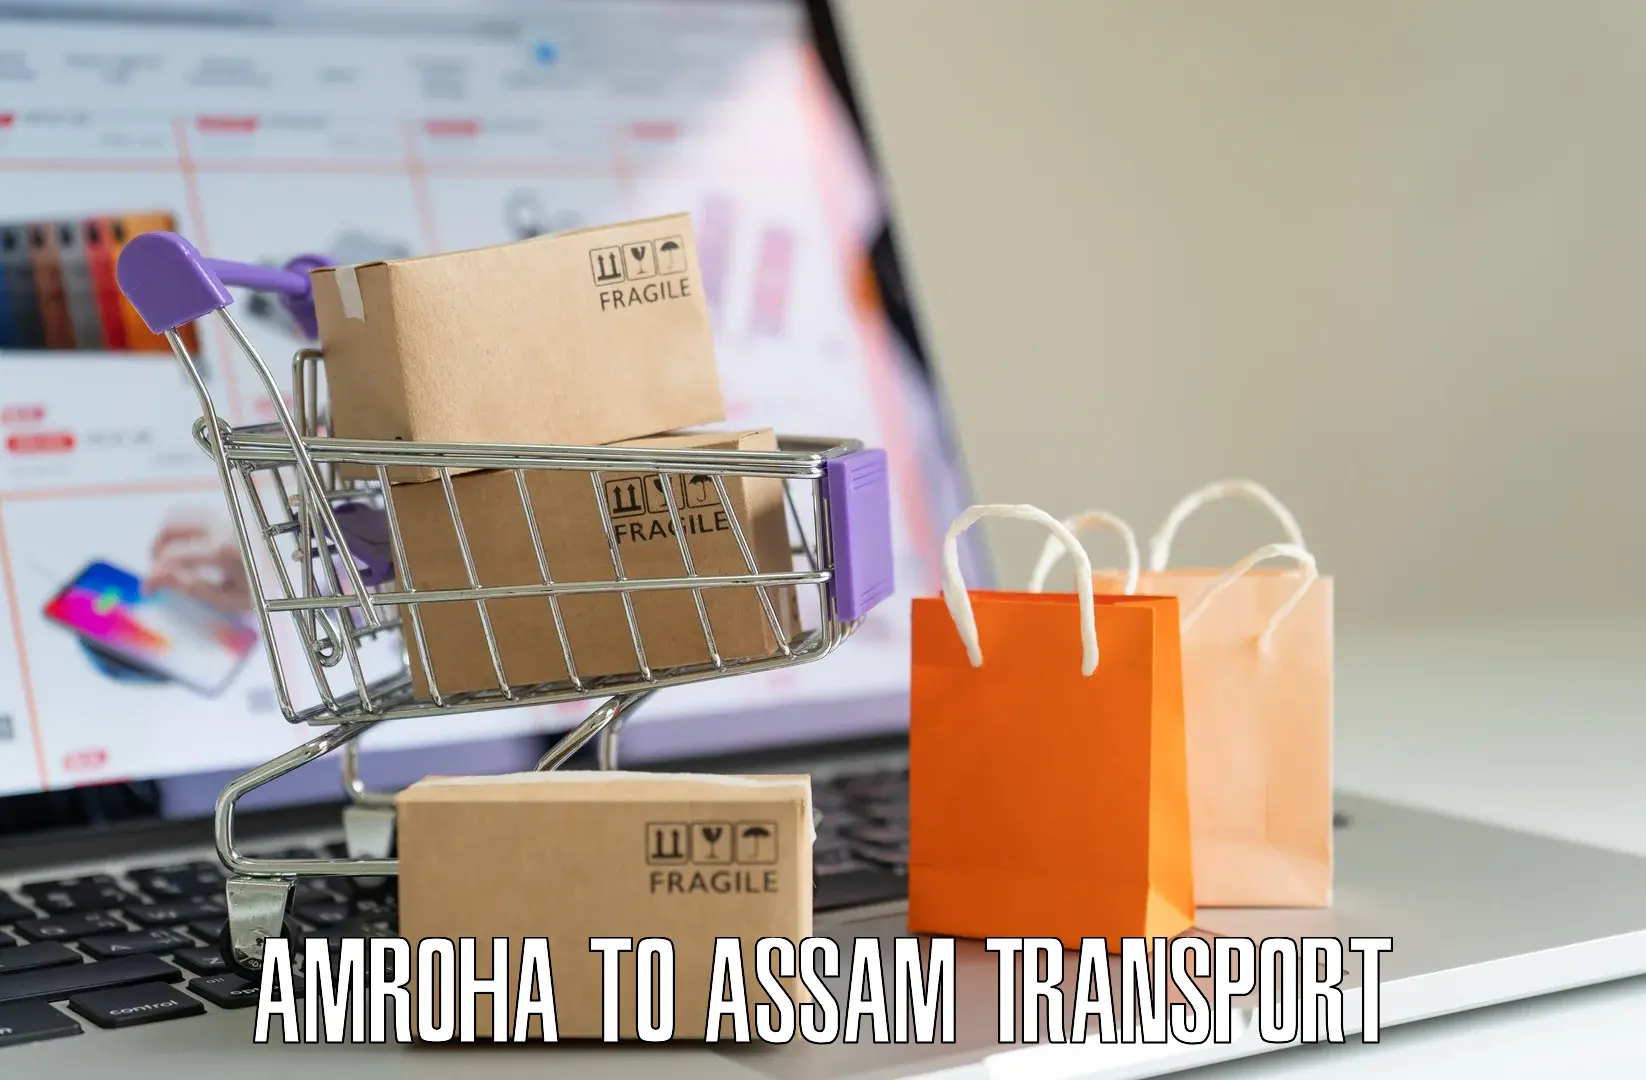 Express transport services Amroha to Kampur